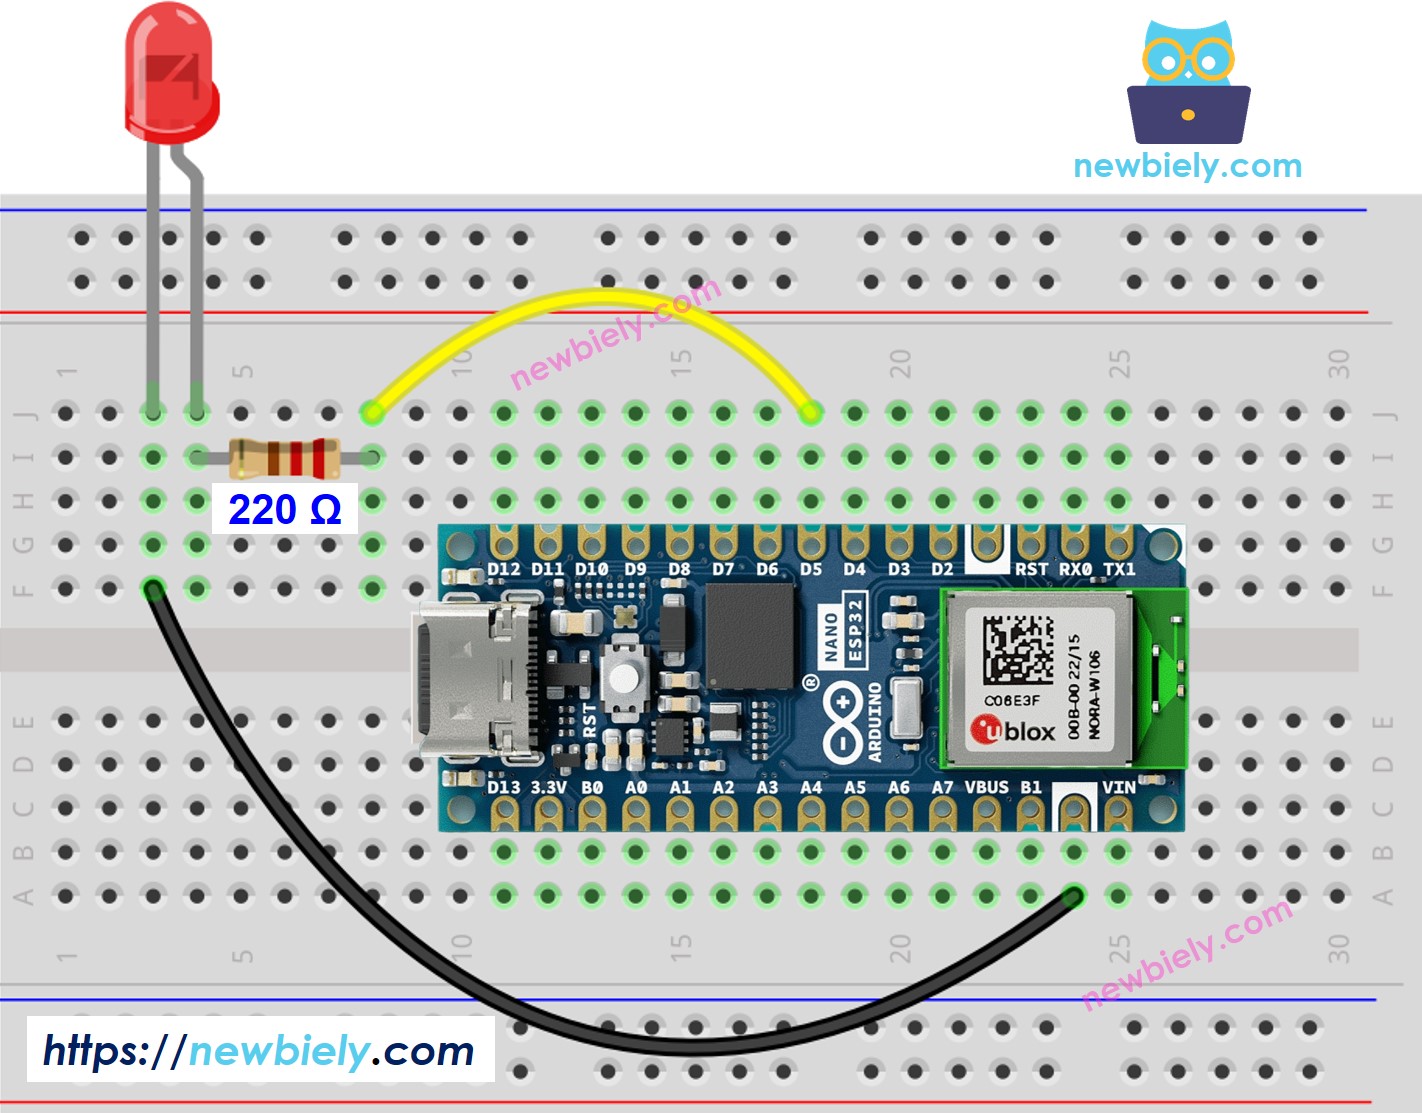 The wiring diagram between Arduino Nano ESP32 and LED